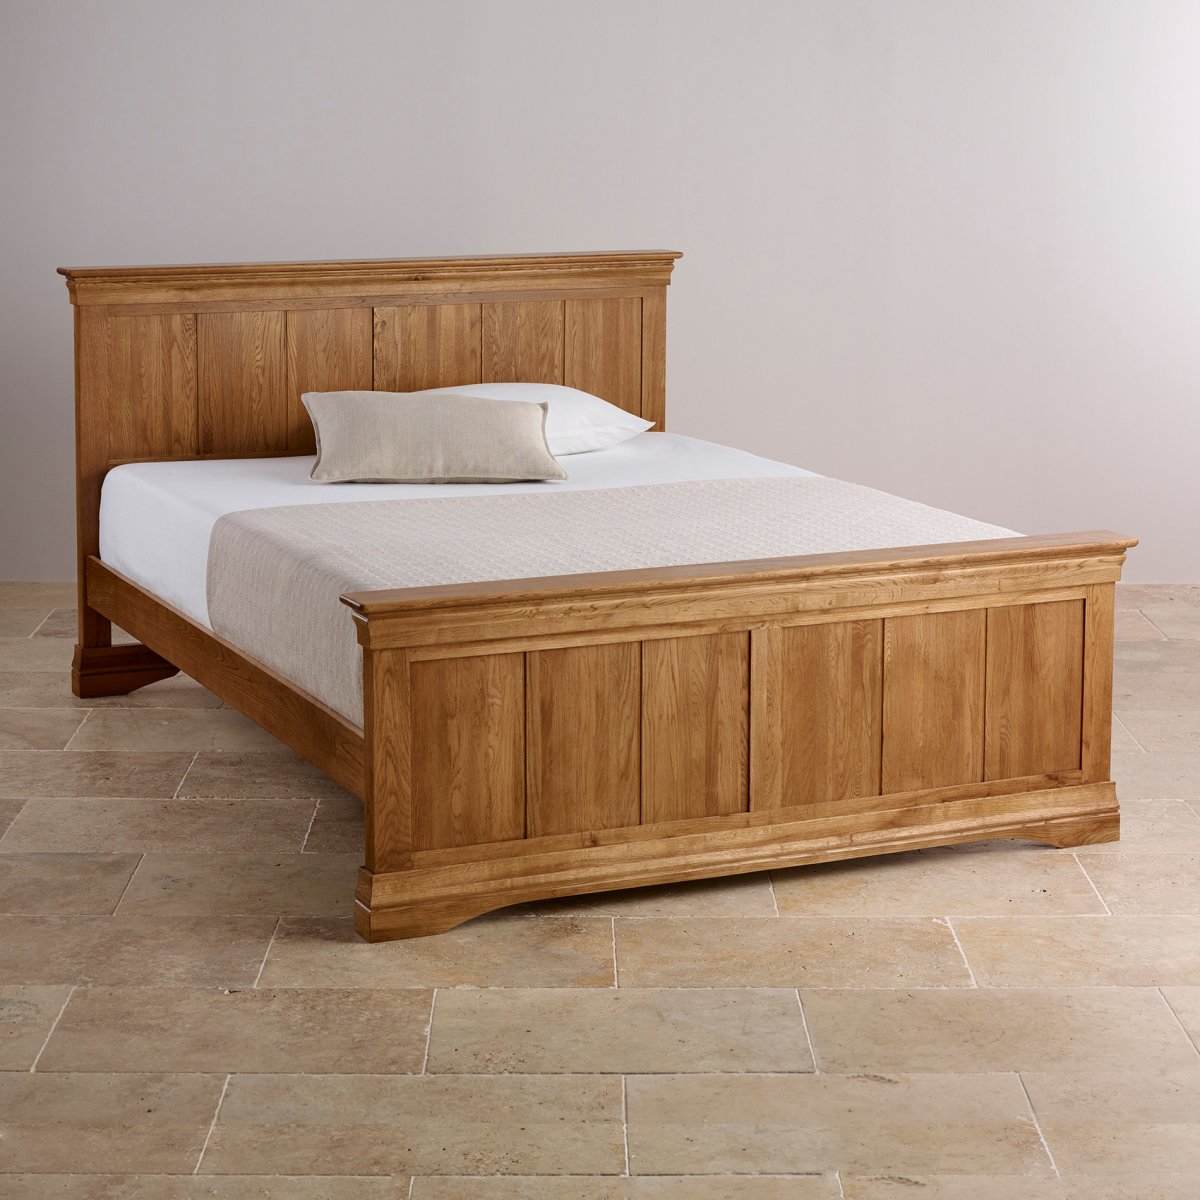 French Farmhouse Super King size Bed Rustic Solid Oak